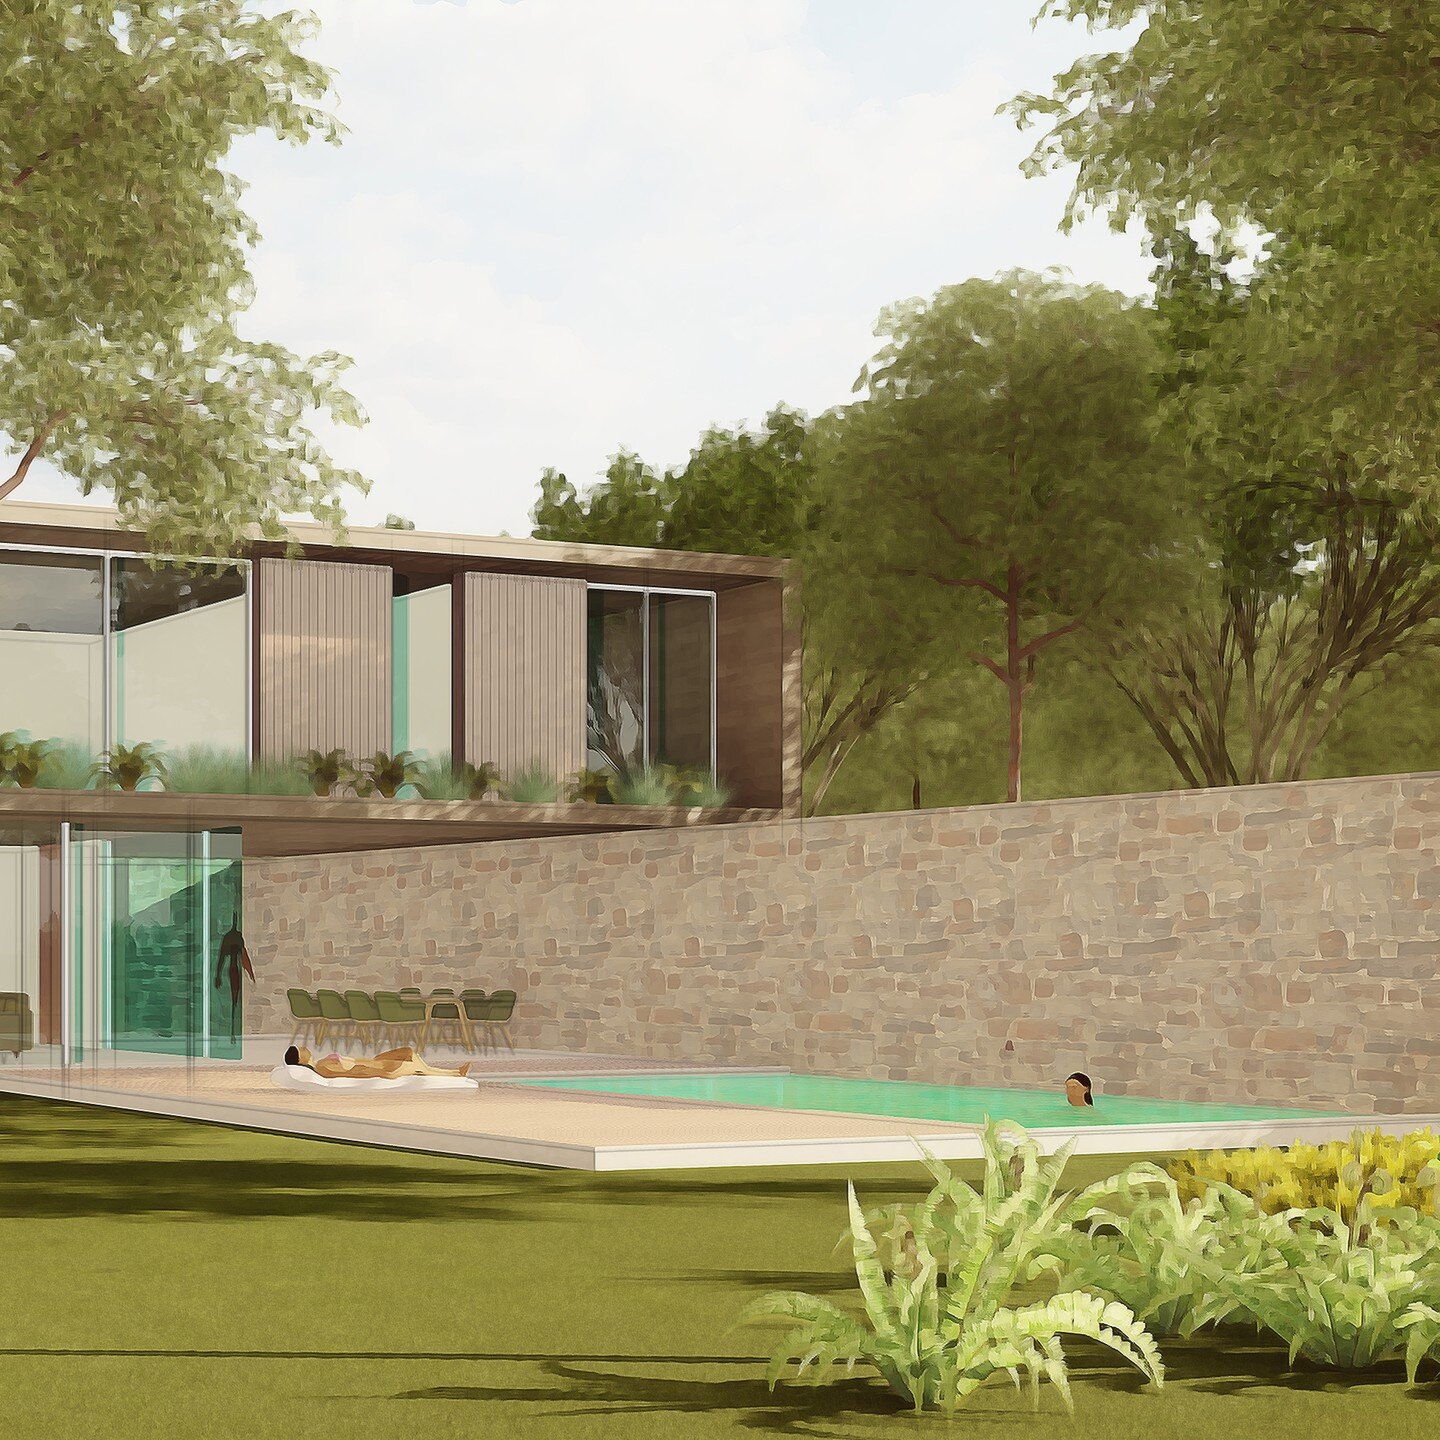 Design of a typical private villa at the wellness resort, Ghana.

#design
#architexture